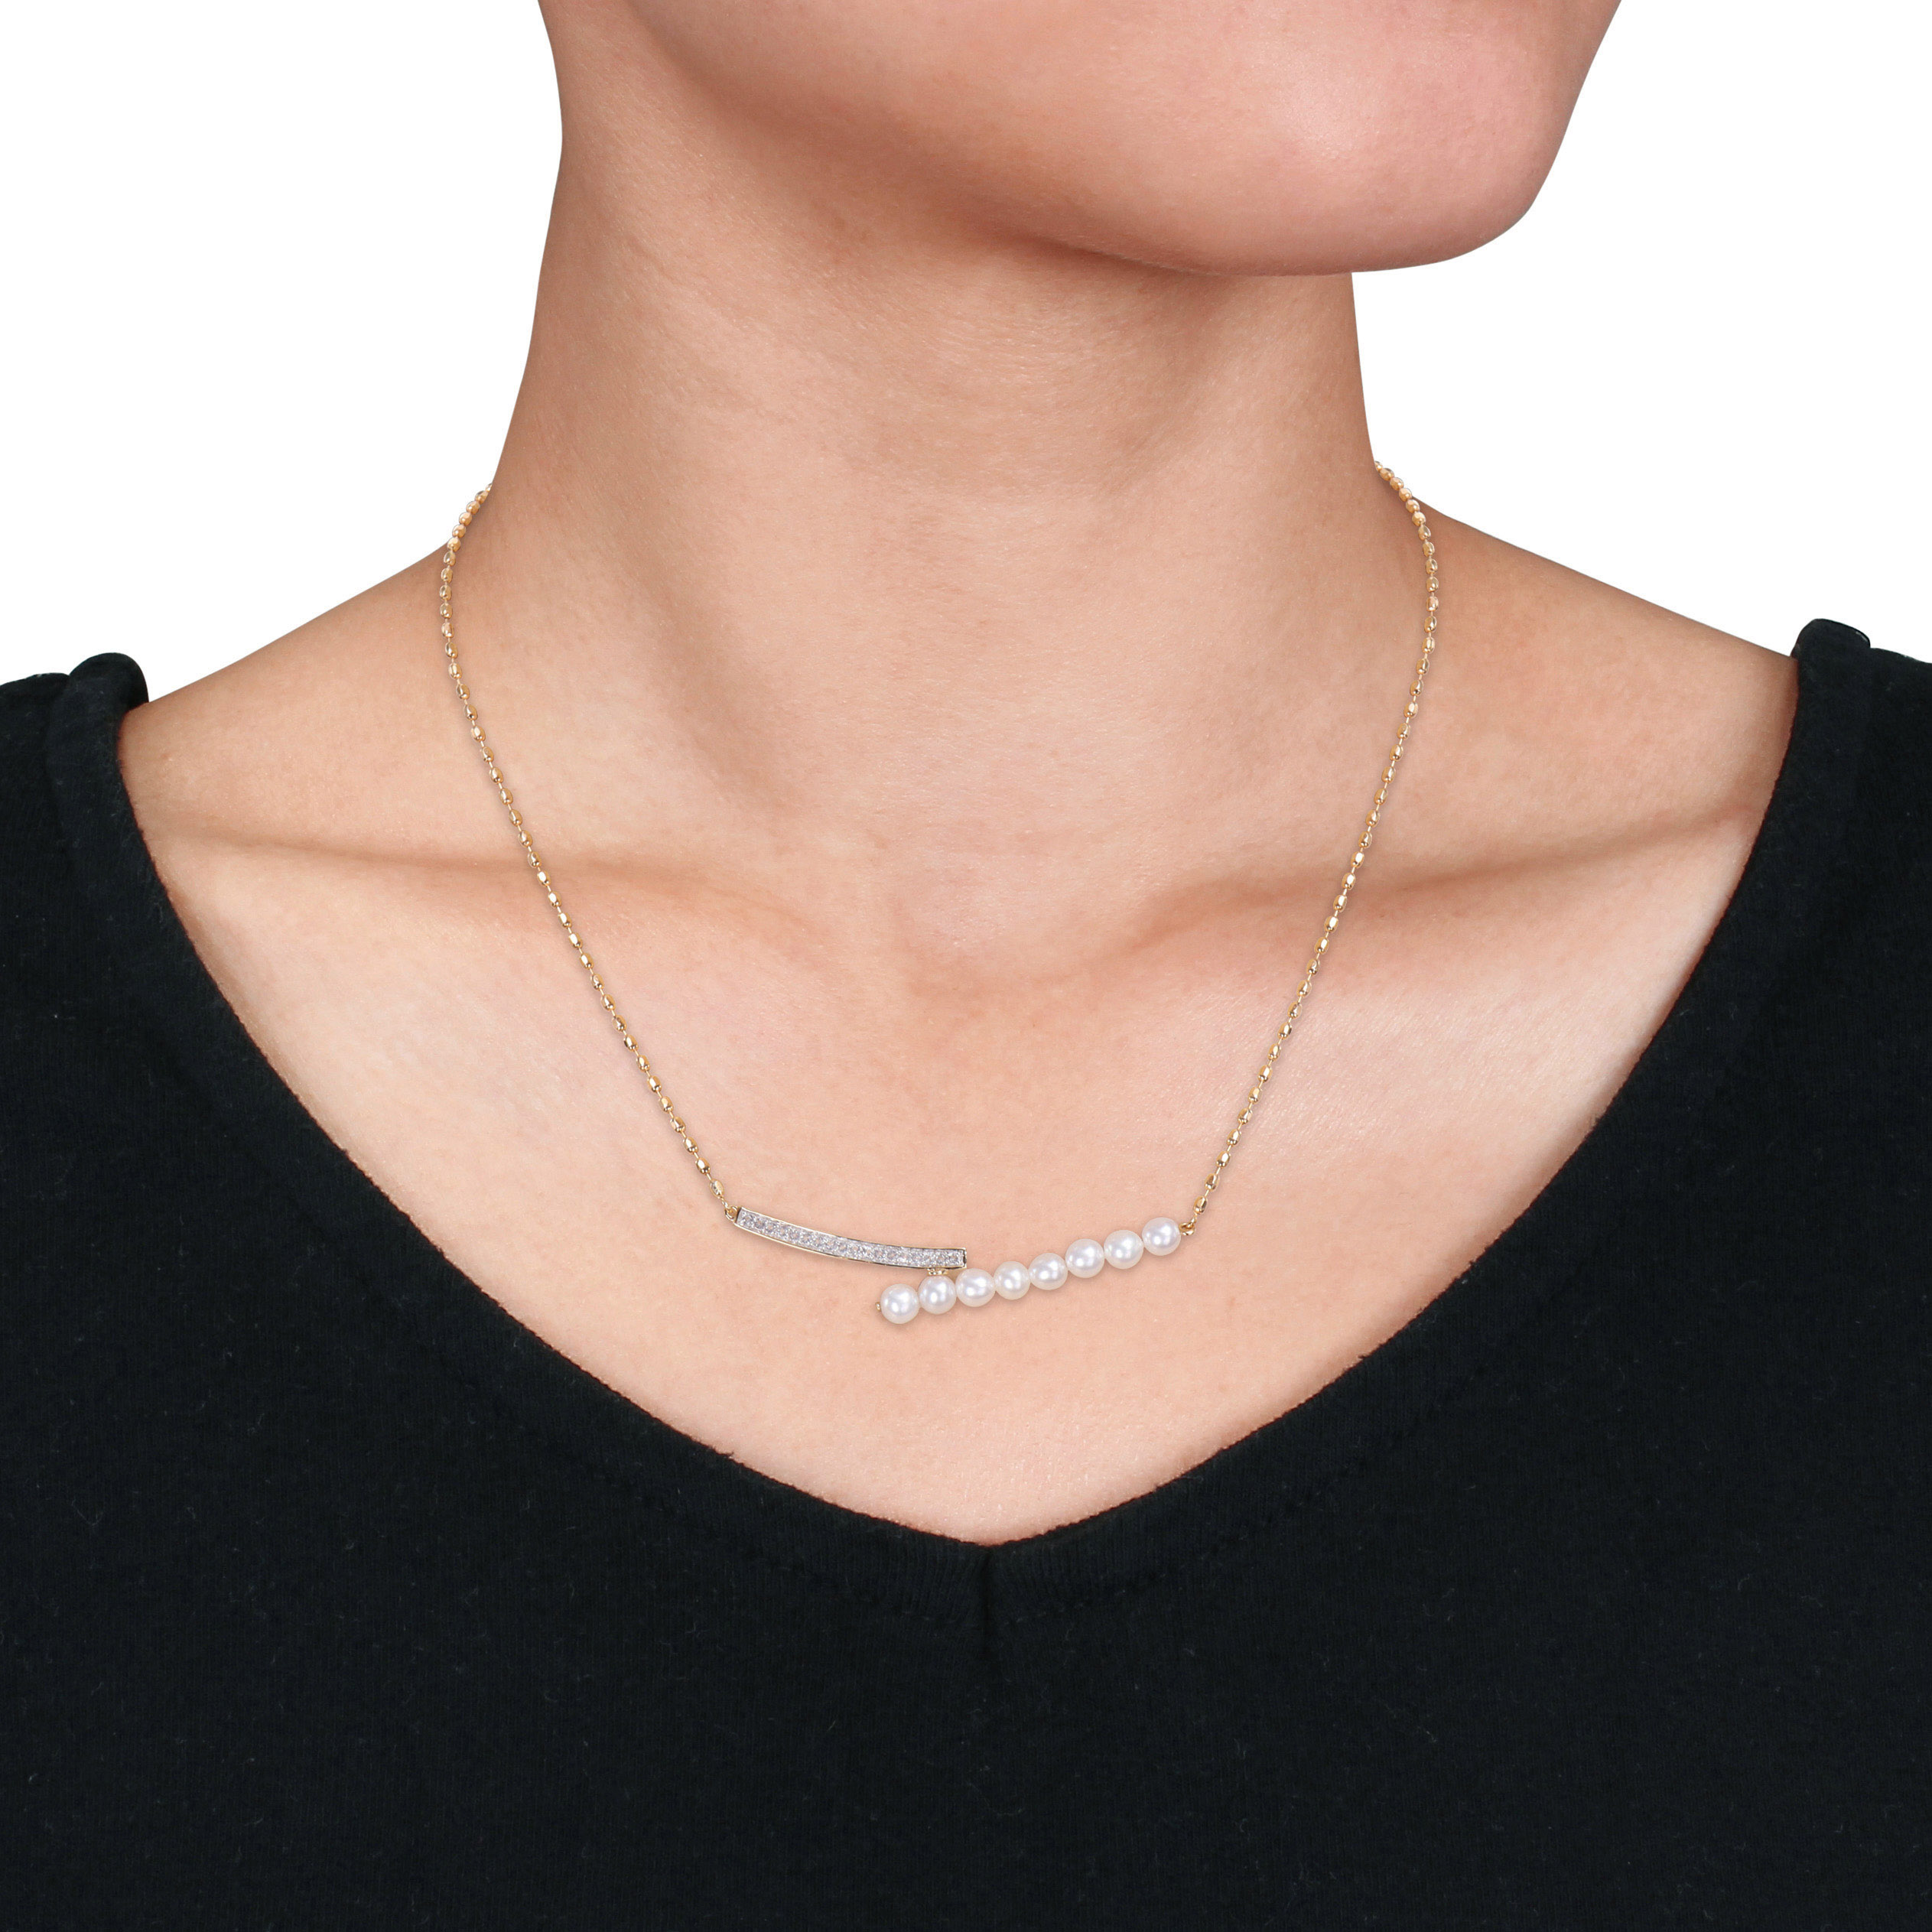 4-4.5 MM White Freshwatear Pearl and 1/5 CT TGW White Topaz Barc Necklace in Yellow Plated Sterling Silver - 18 in.